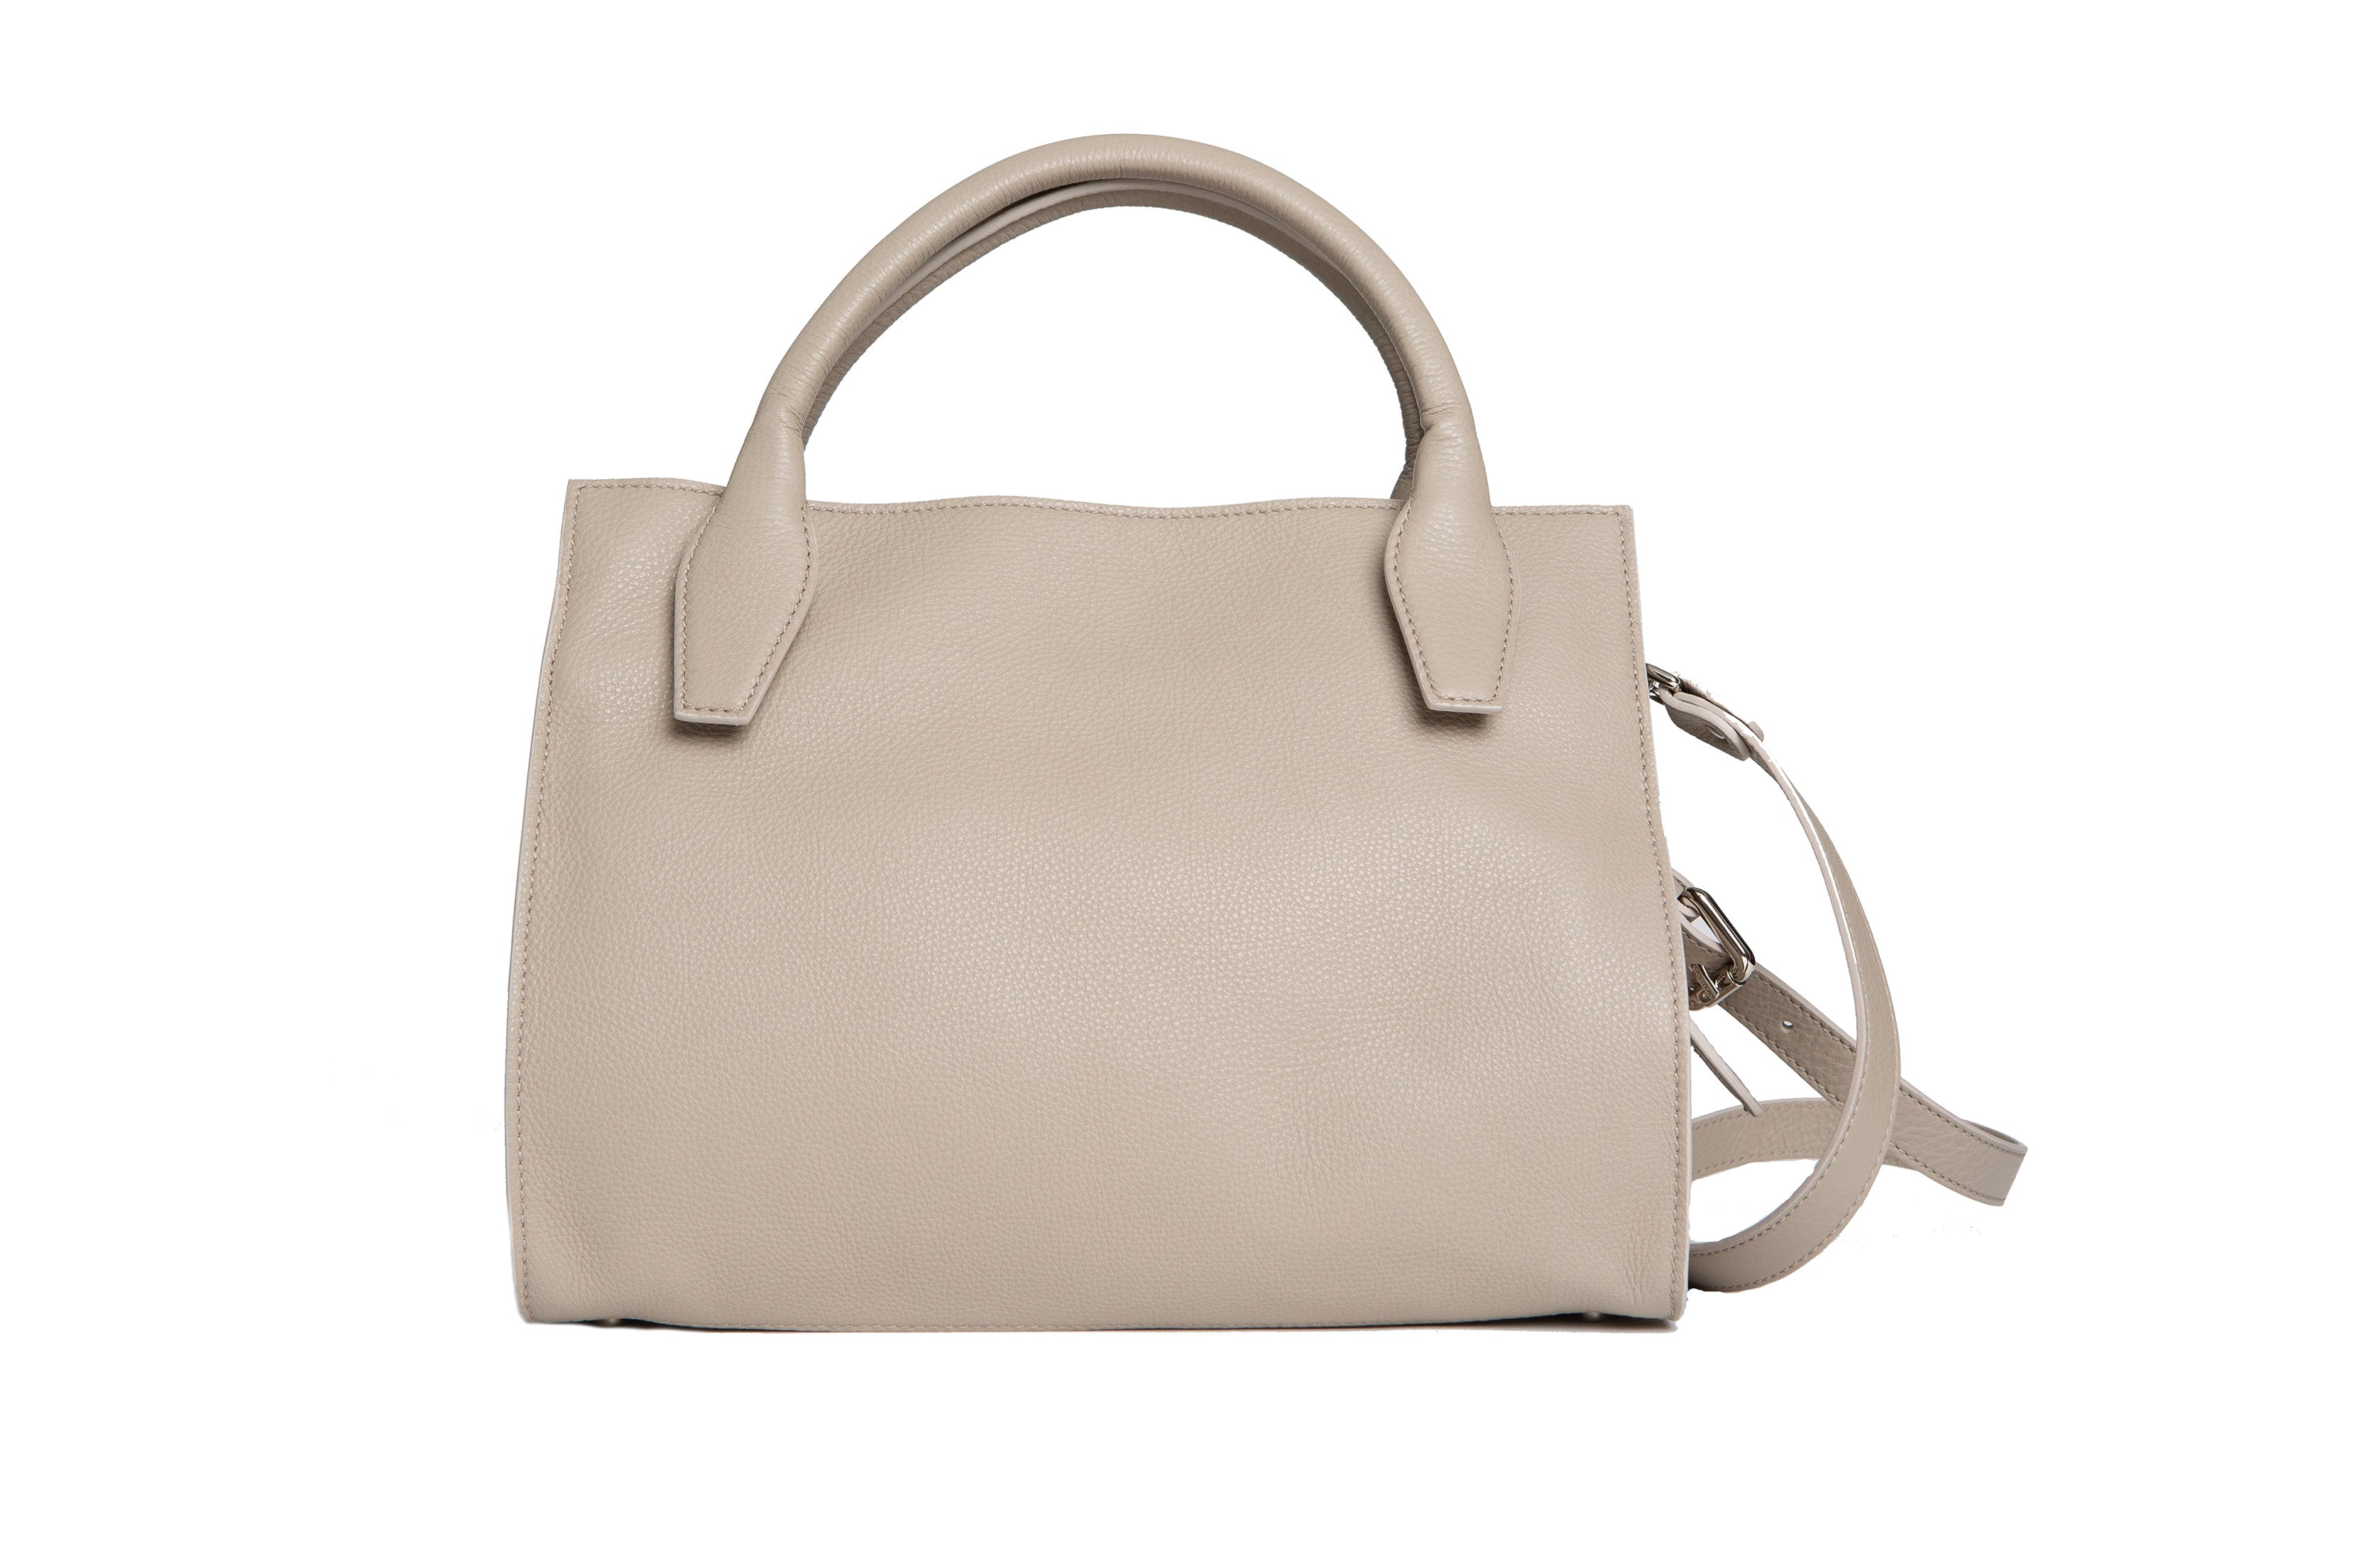 Sydney Tote Bag - Taupe